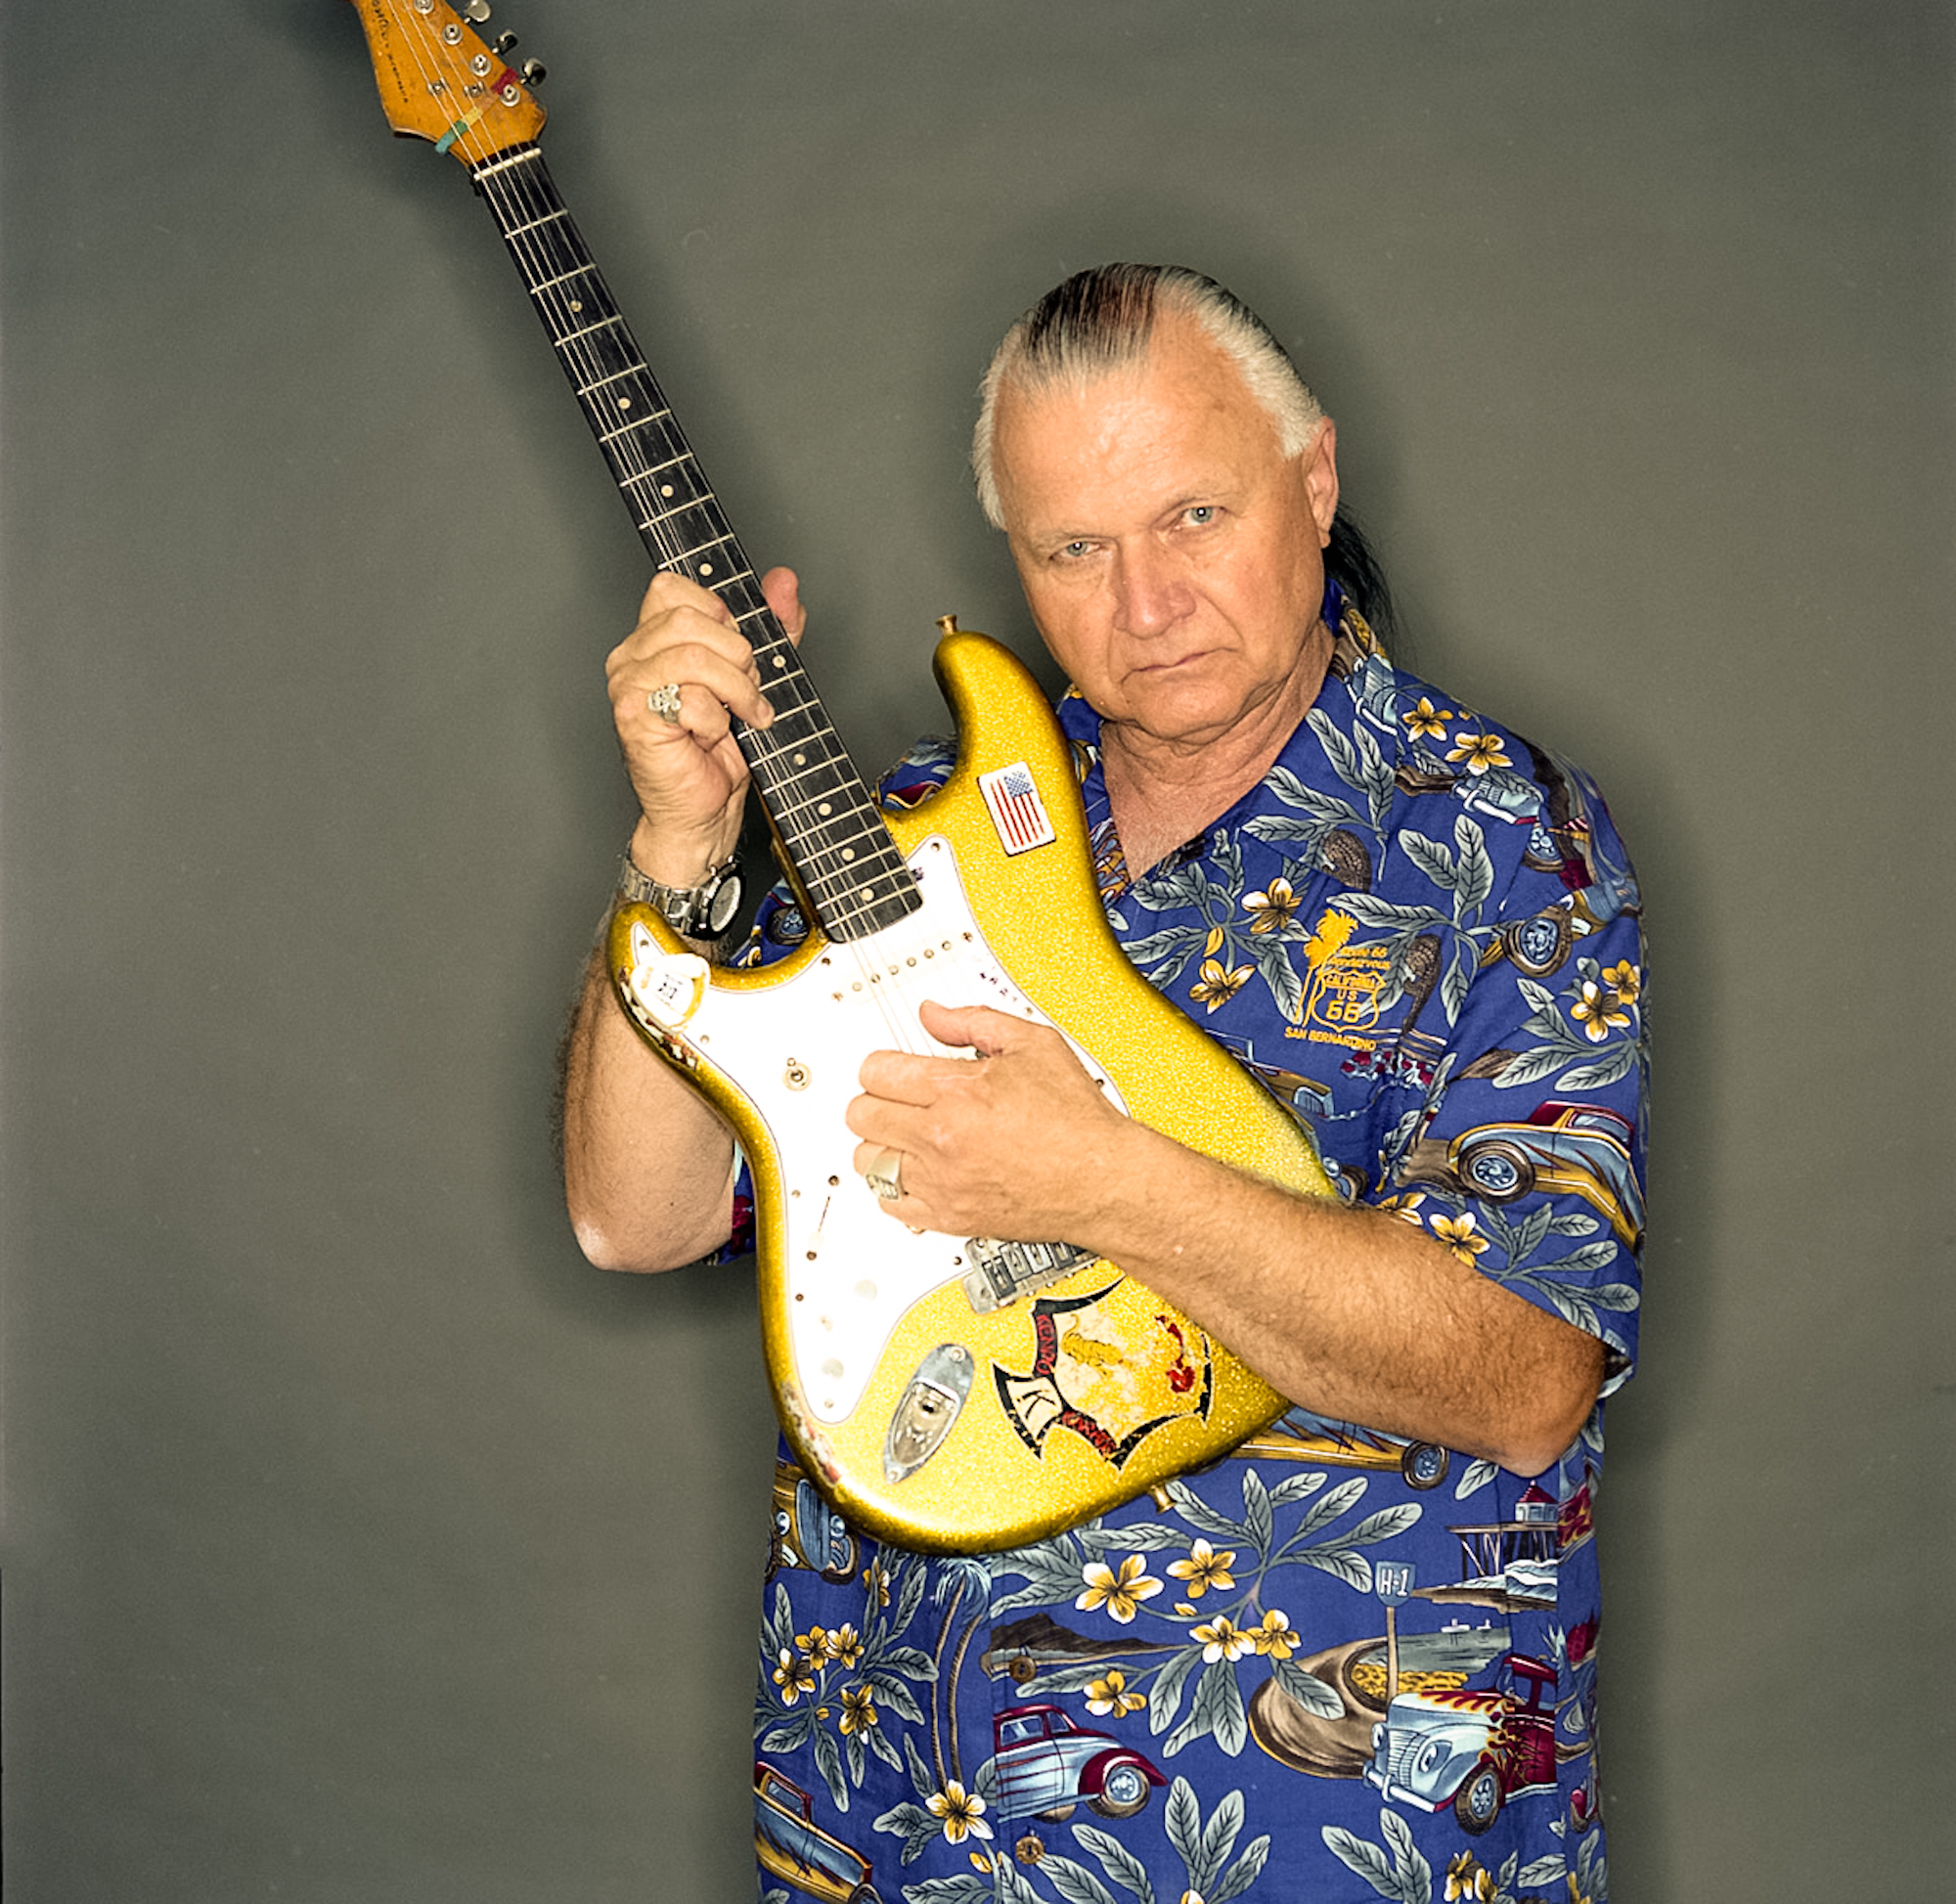 Dick dale shows